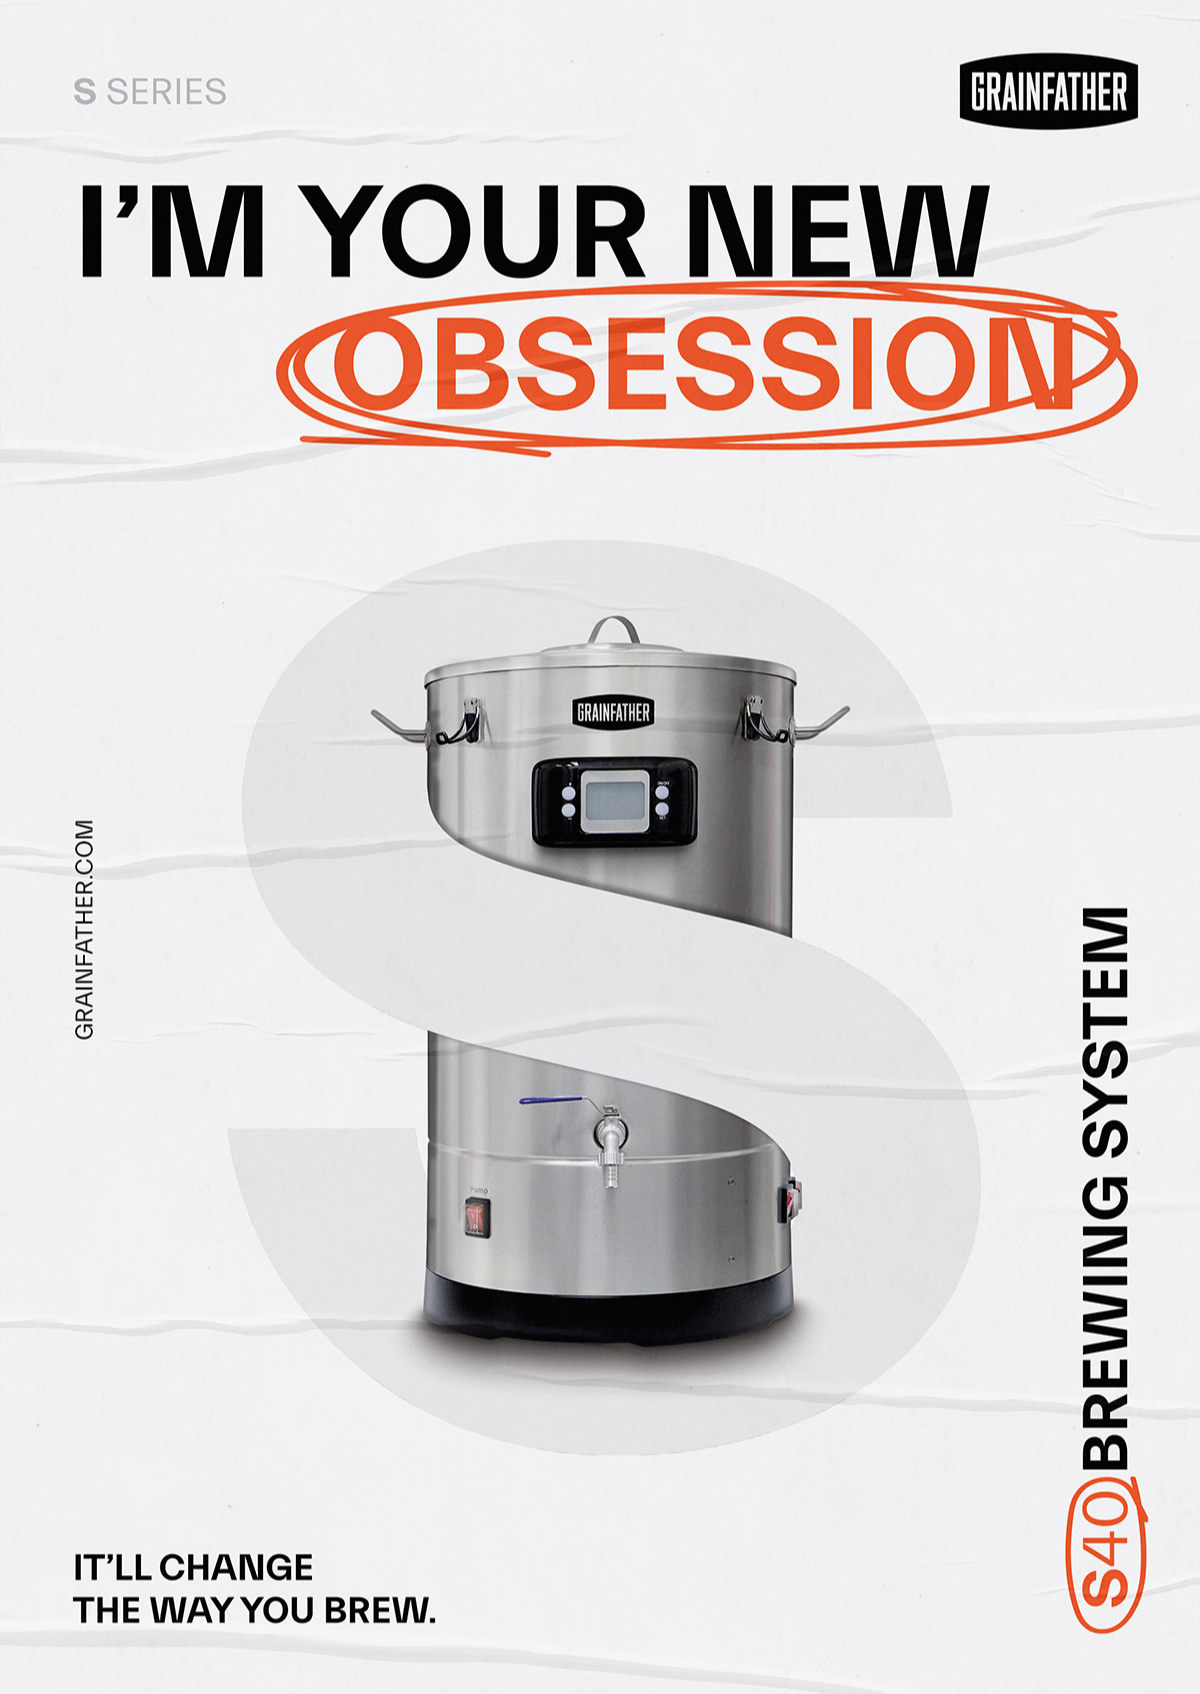 grainfather poster saying i'm your new obsession